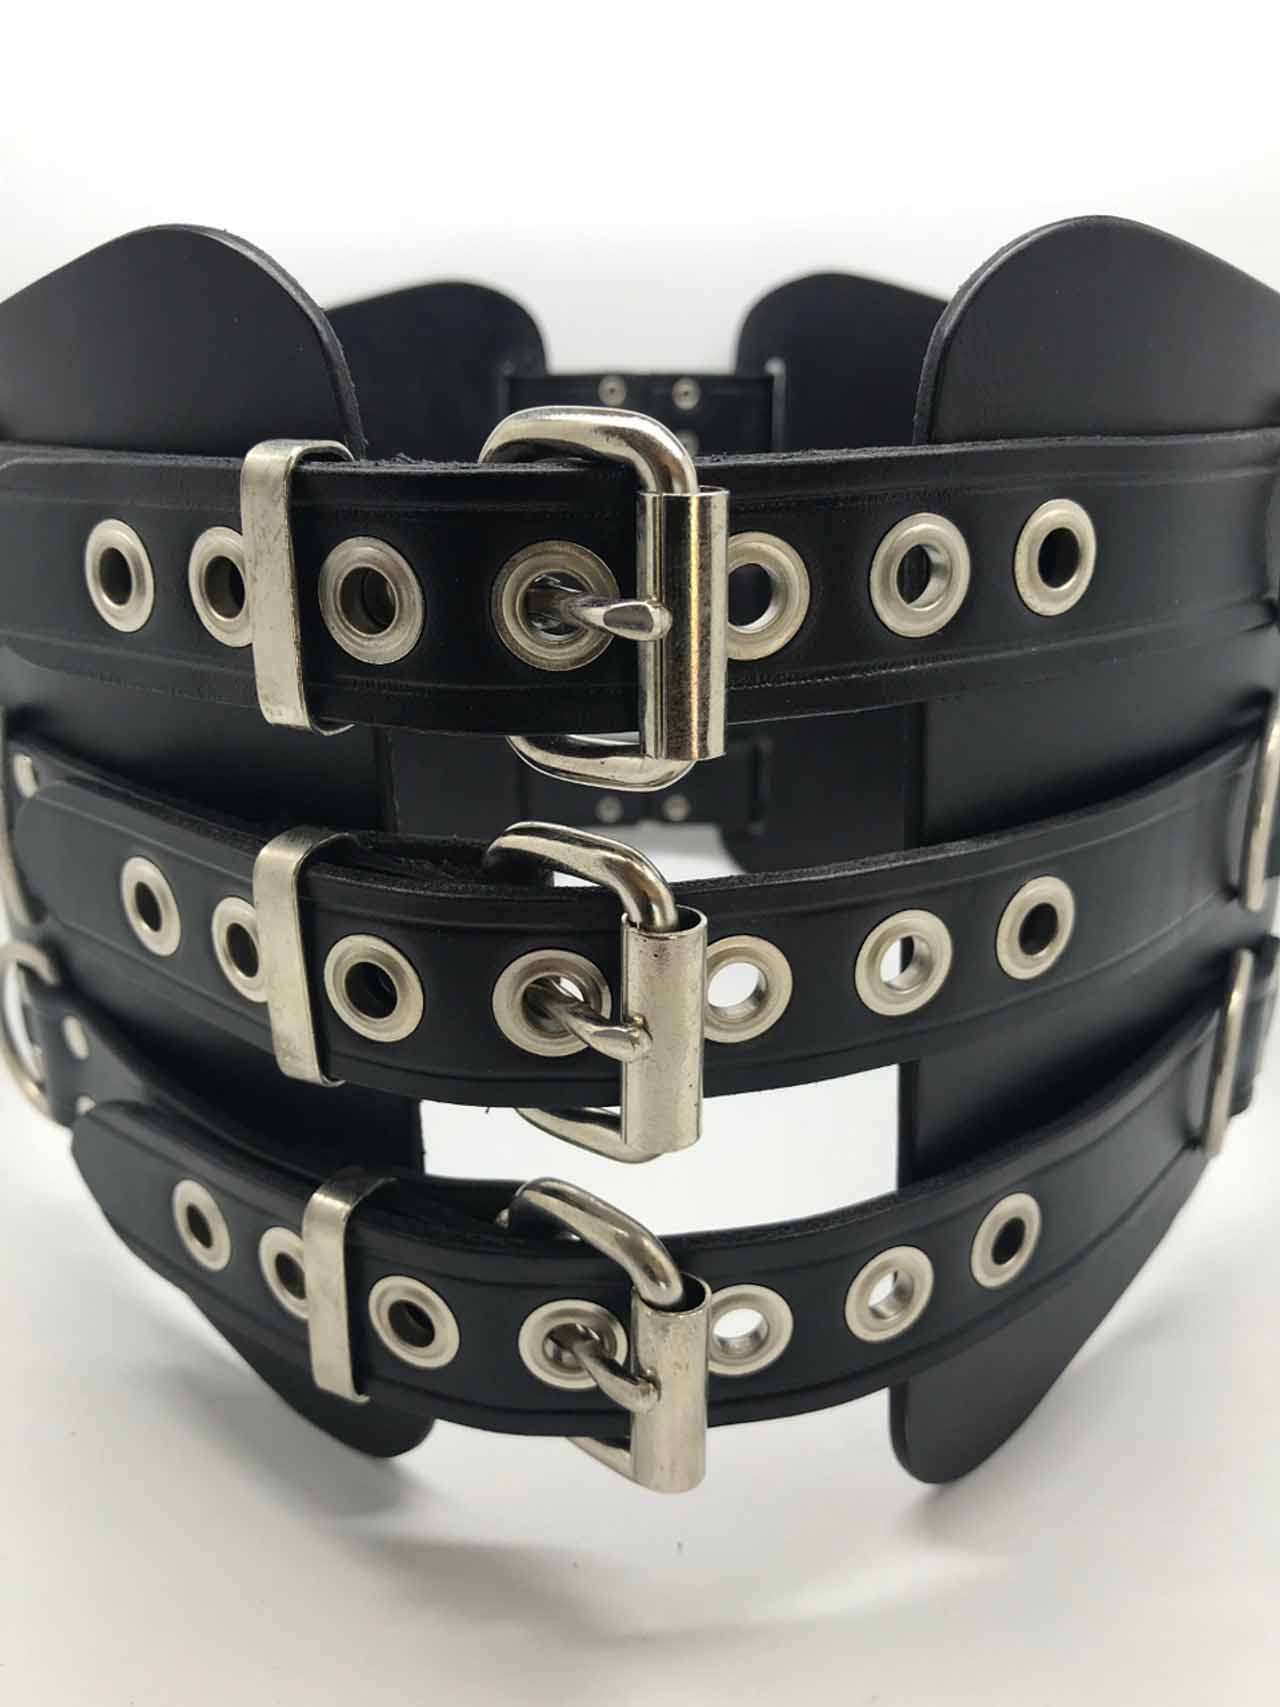 The back of the Leather Kidney Belt with Back Laces.